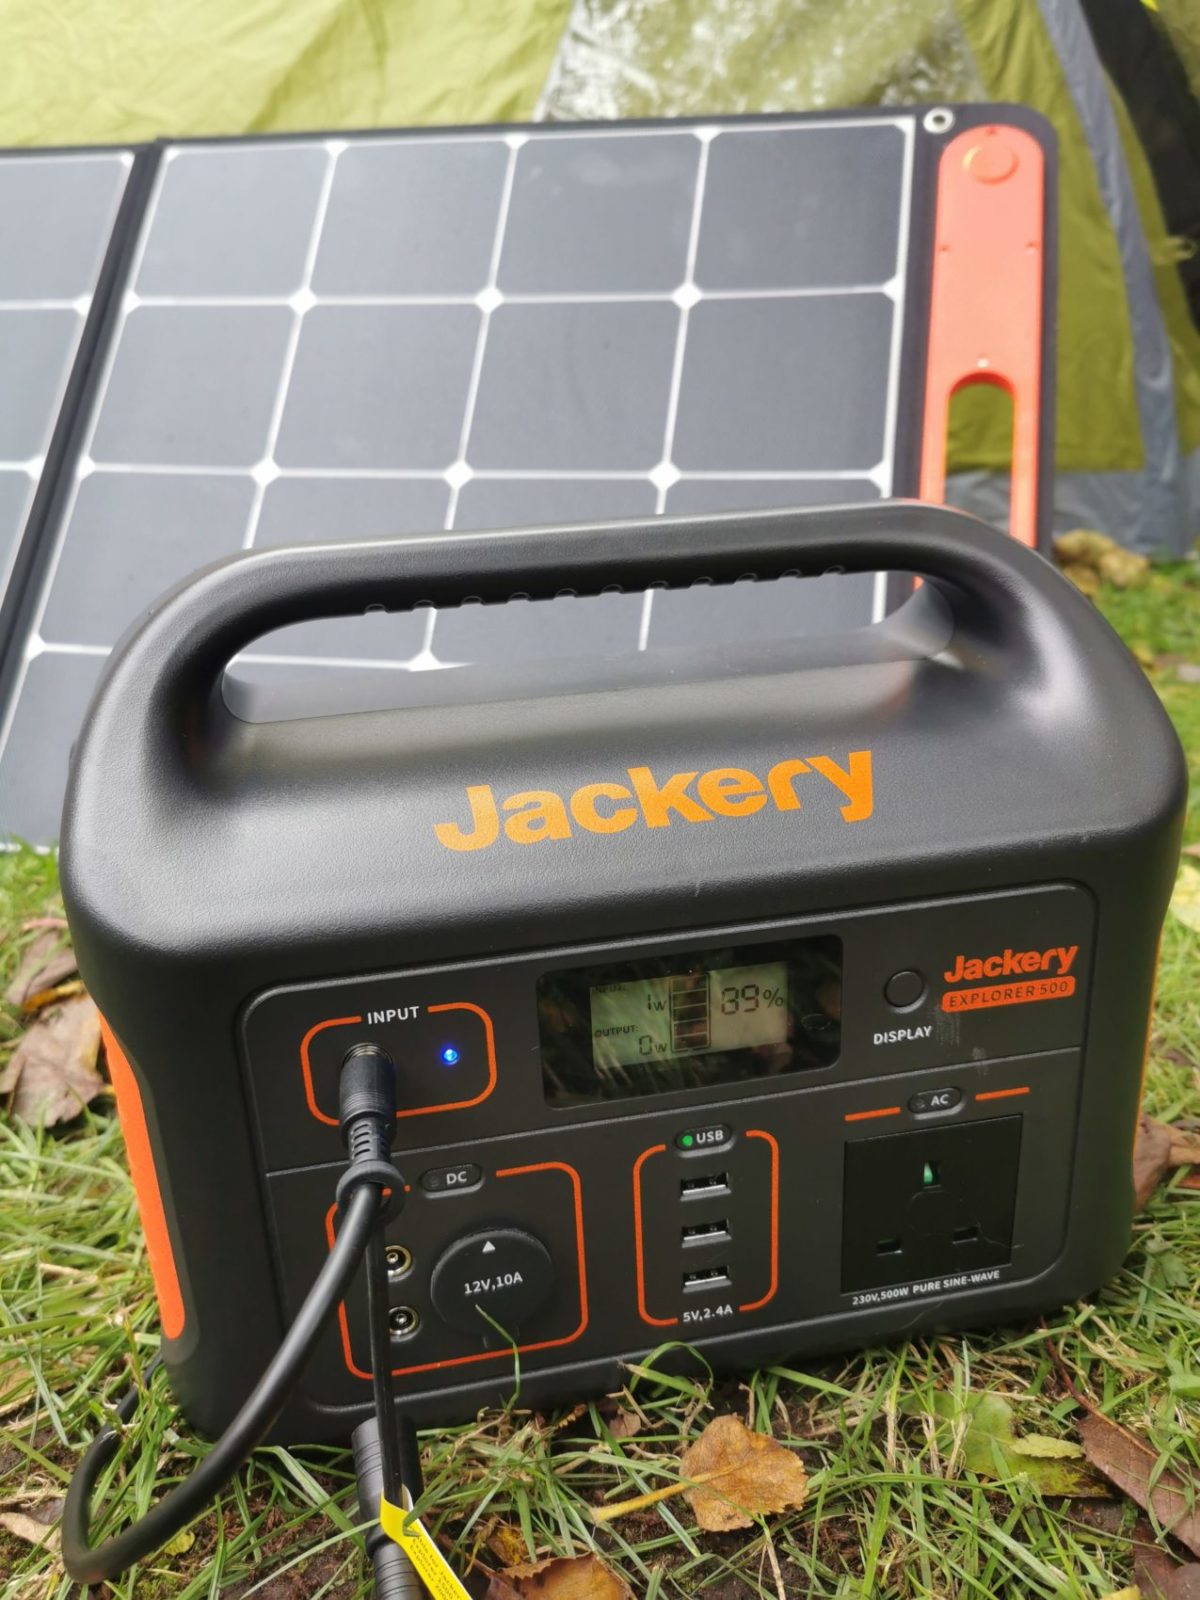 https://www.campingwithstyle.co.uk/wp-content/uploads/2021/11/jackery-explorer-500-power-station-review-1-scaled.jpg